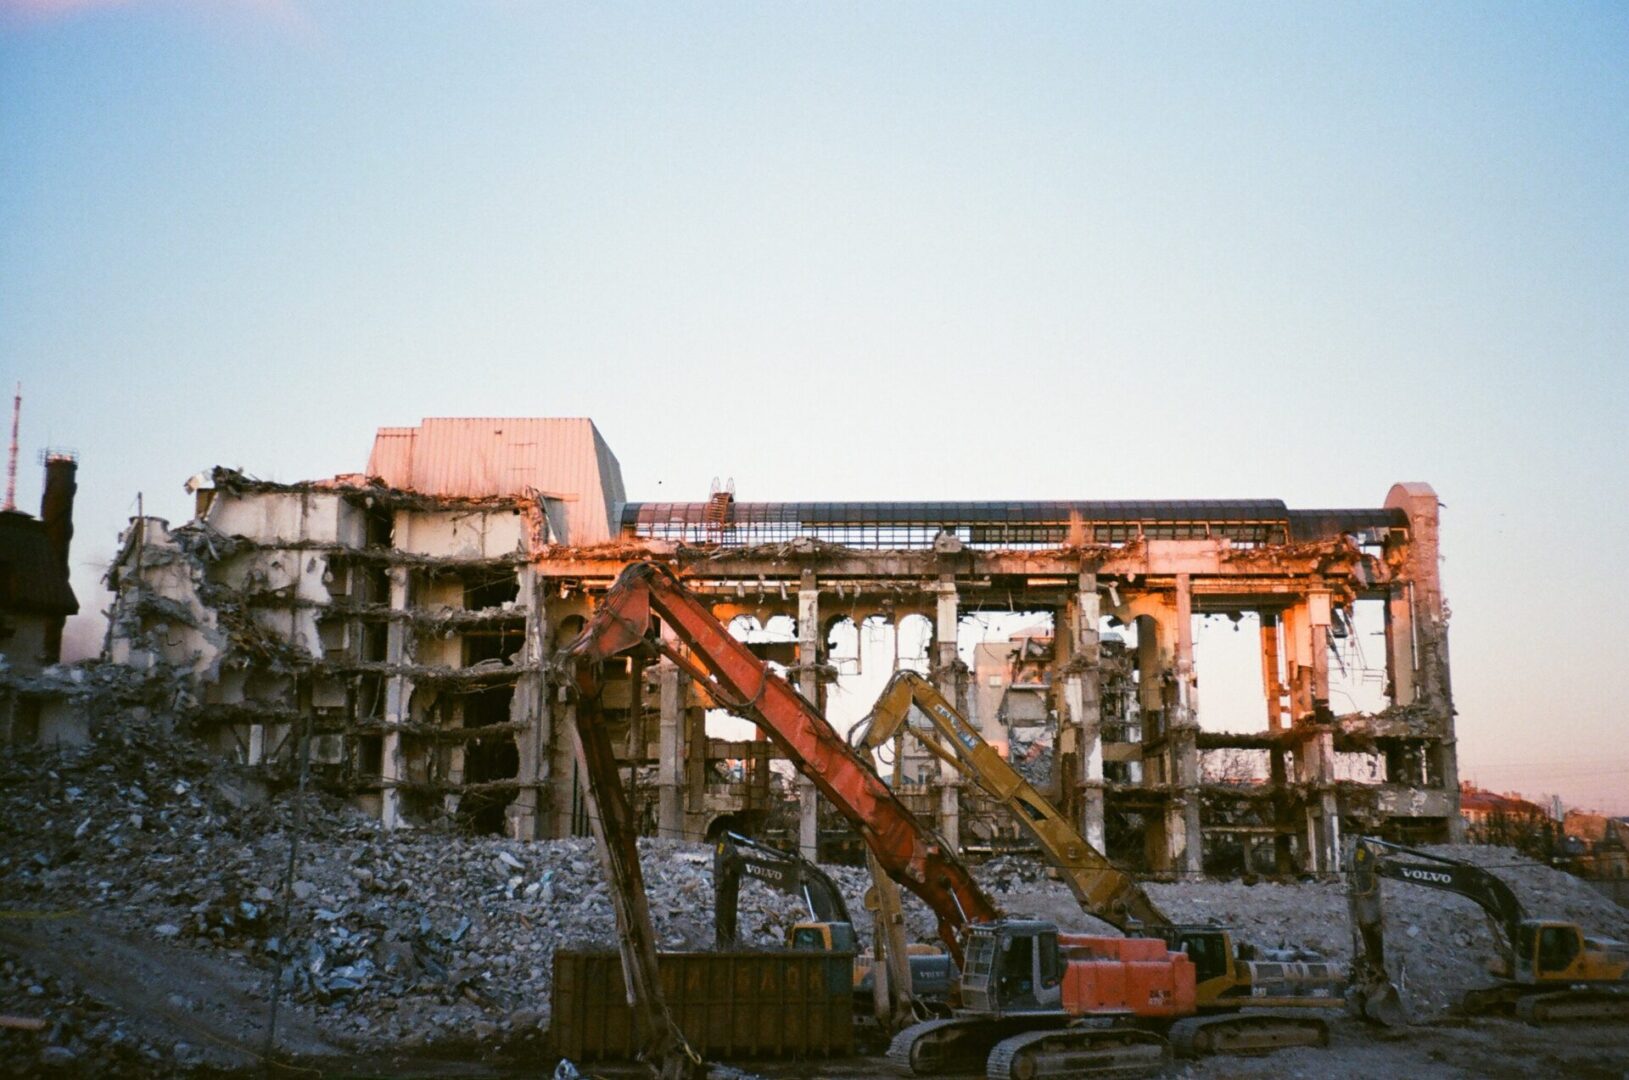 A construction site with cranes and rubble in the foreground.